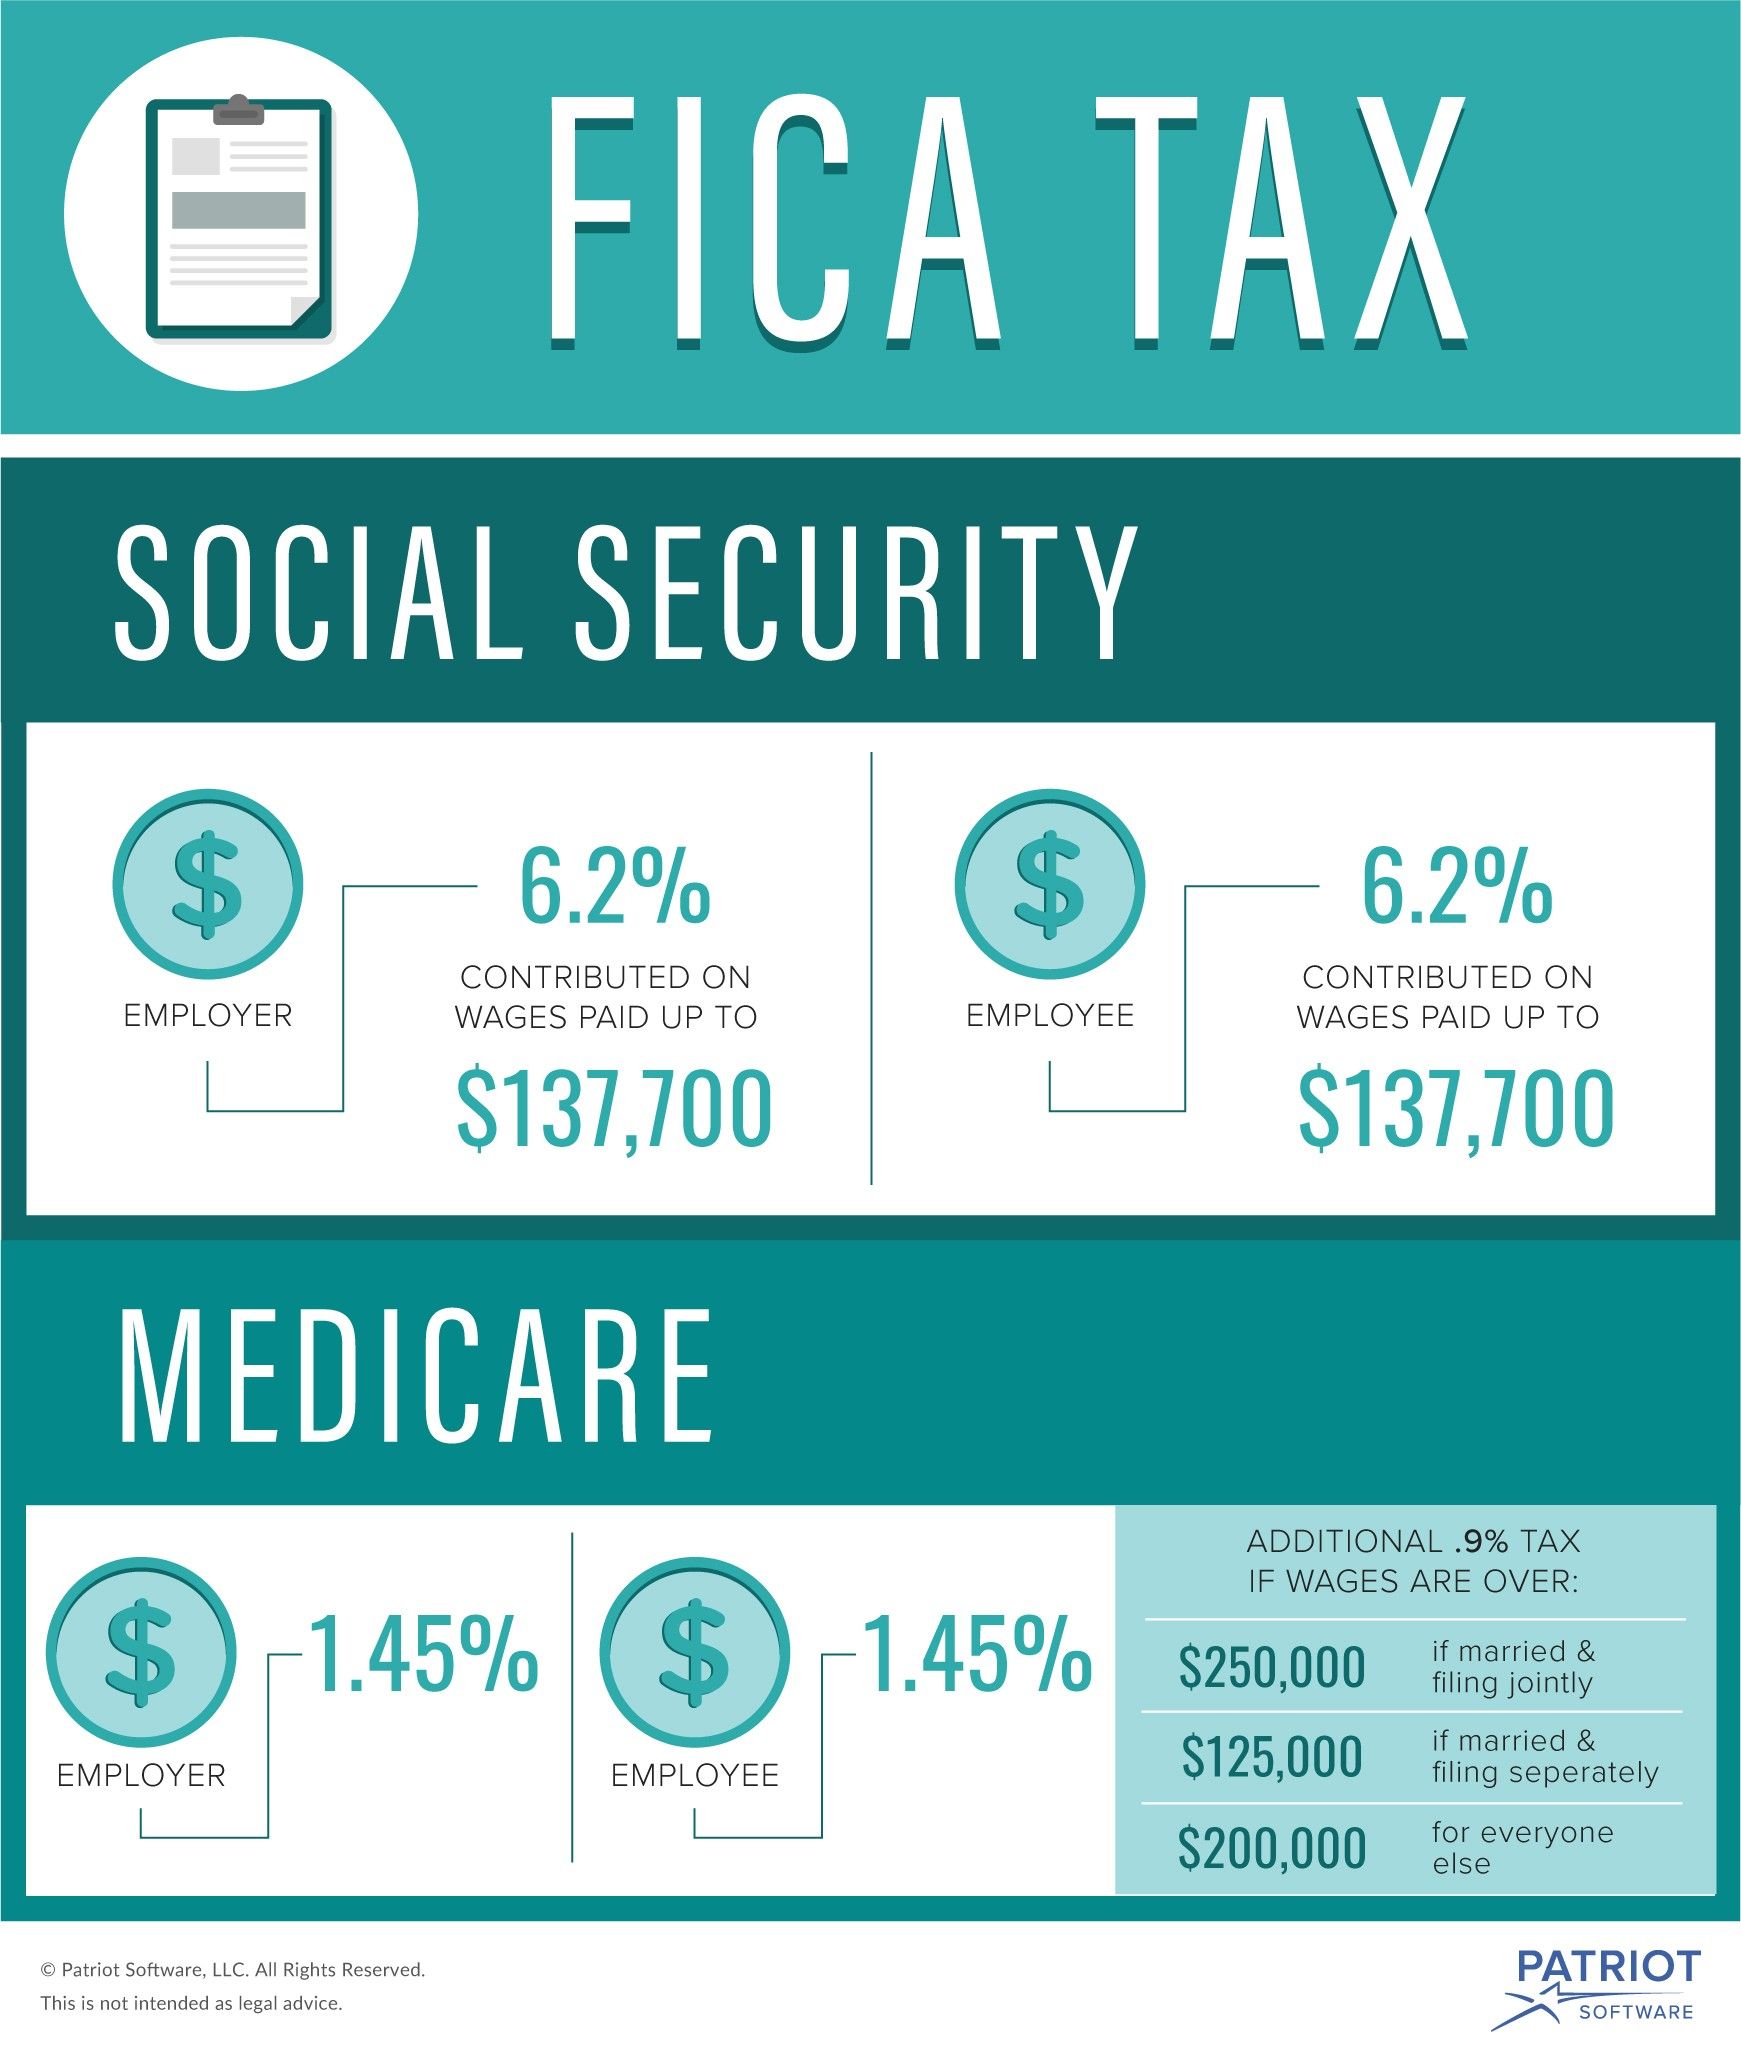 What Is FICA tax, and How Much Is It?